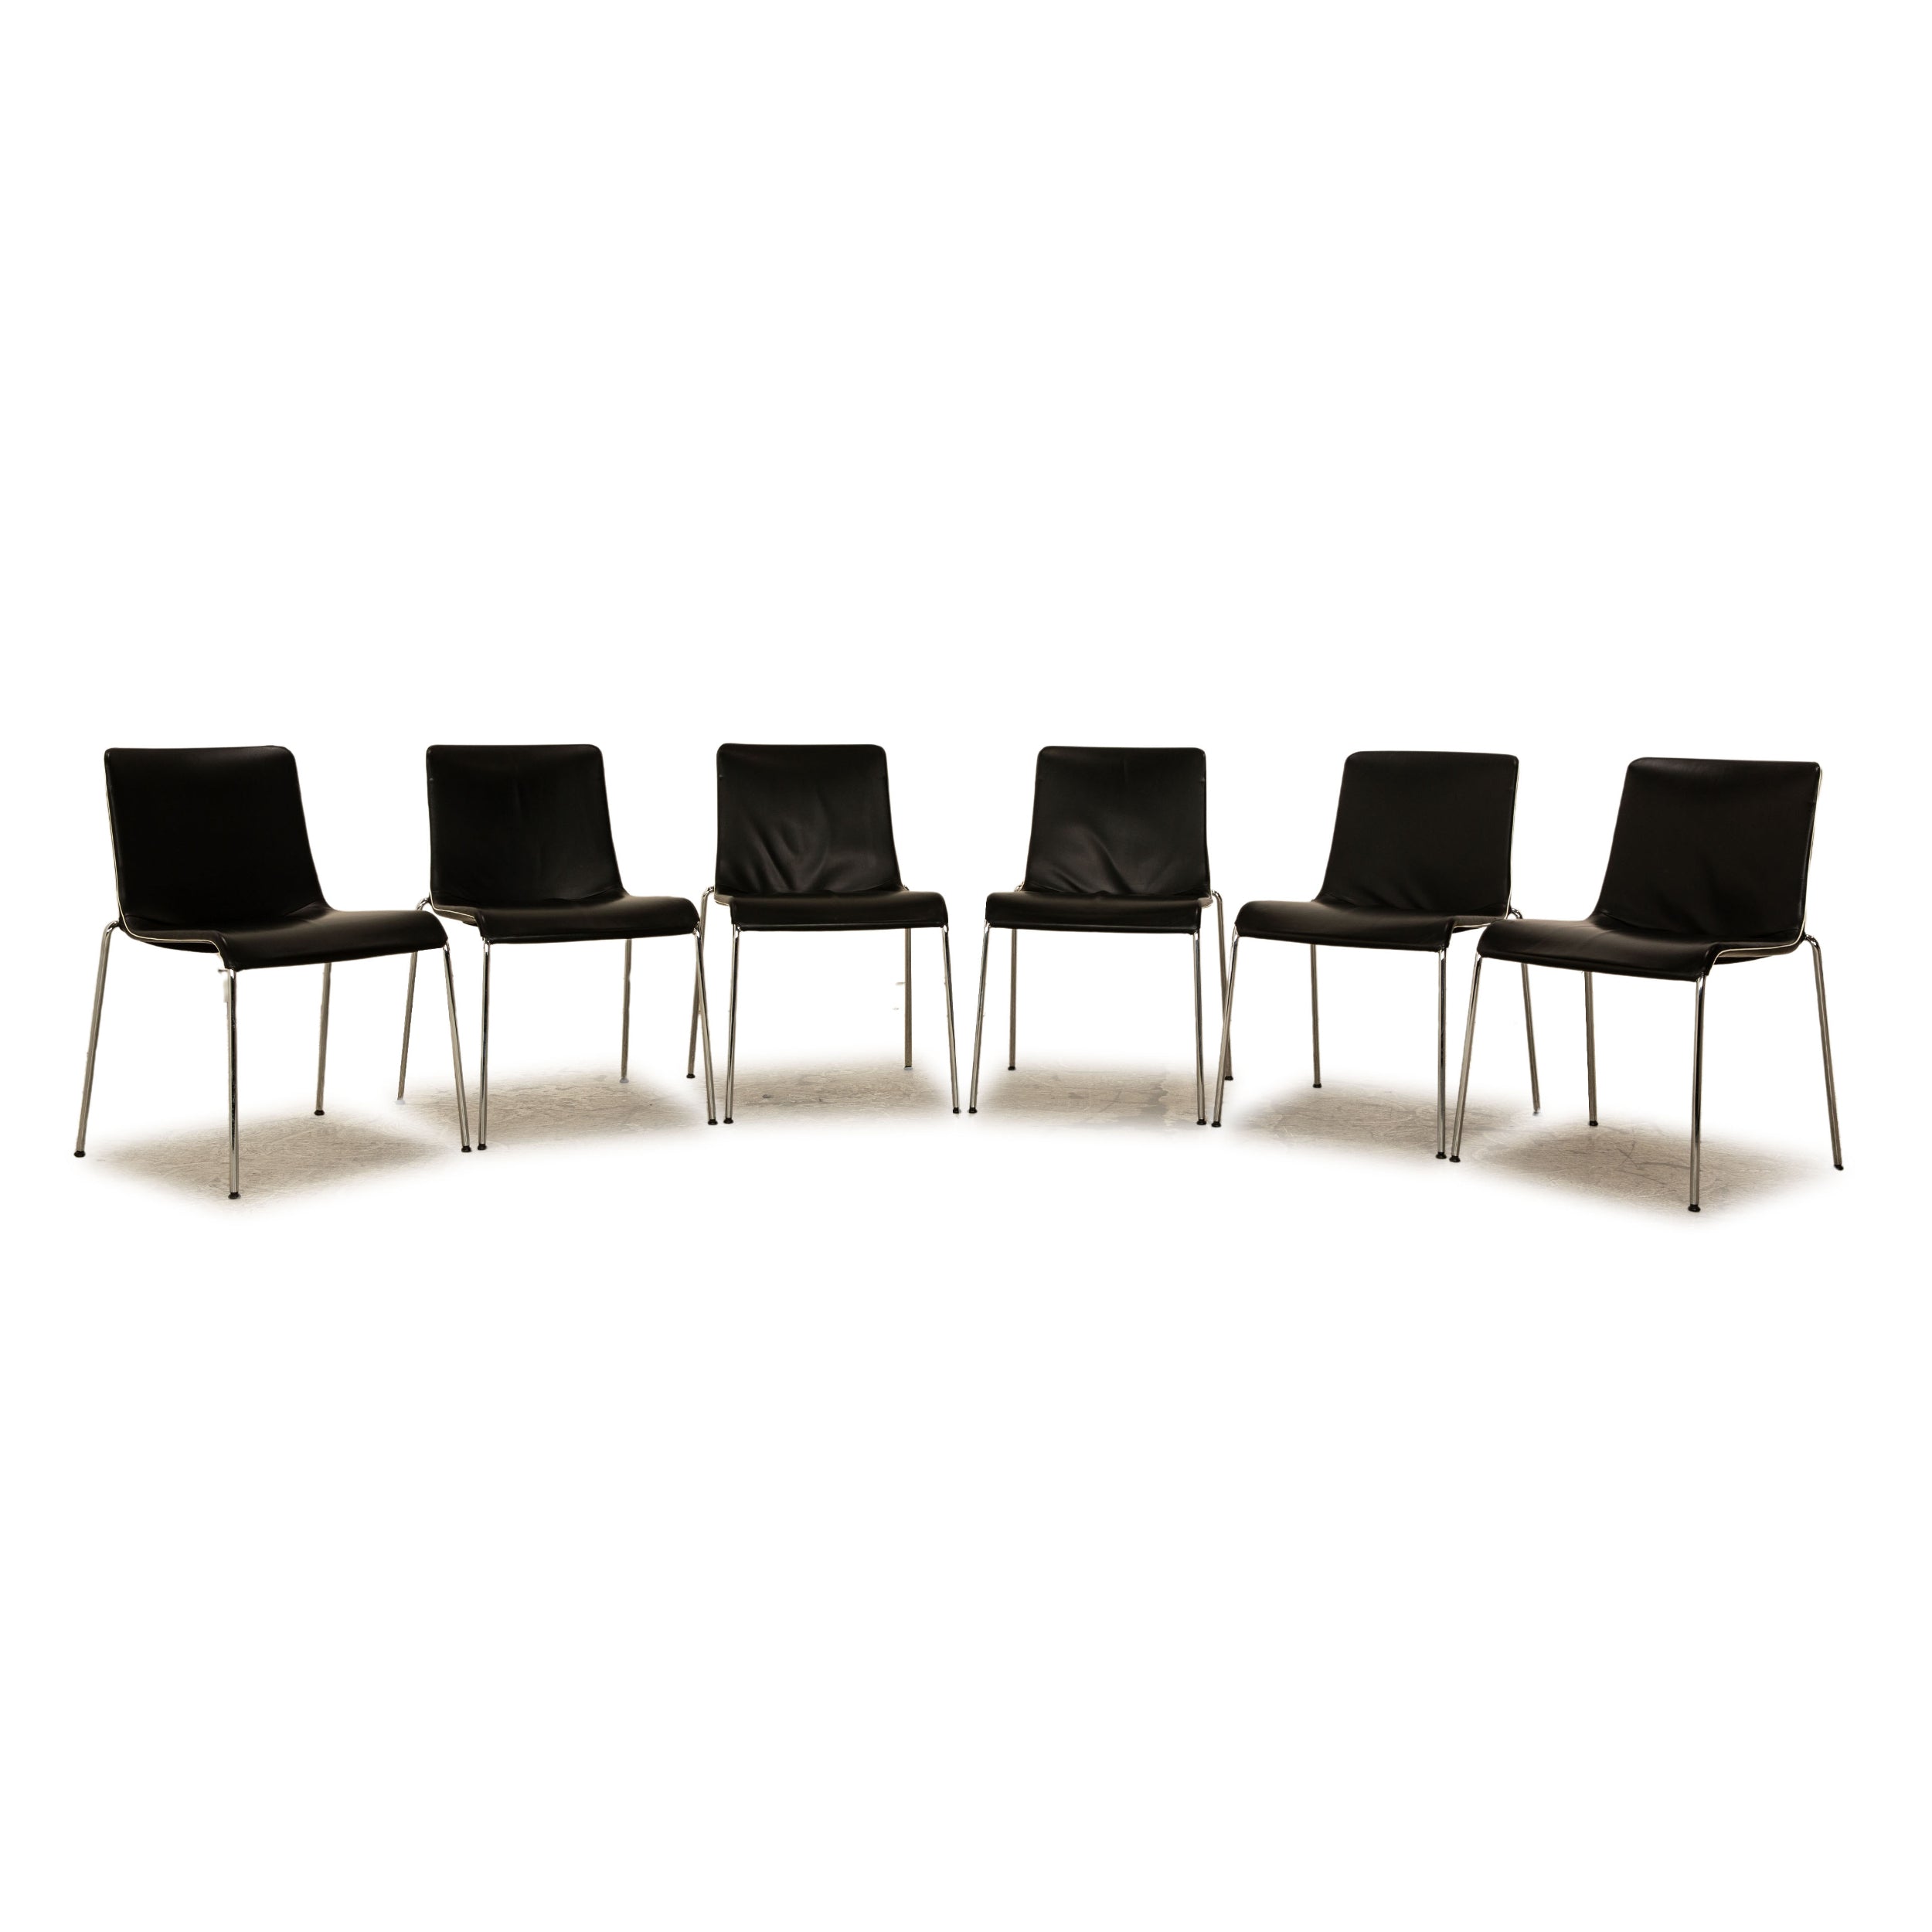 Set of 6 Walter Knoll Liz Leather Chairs Black Dining Room